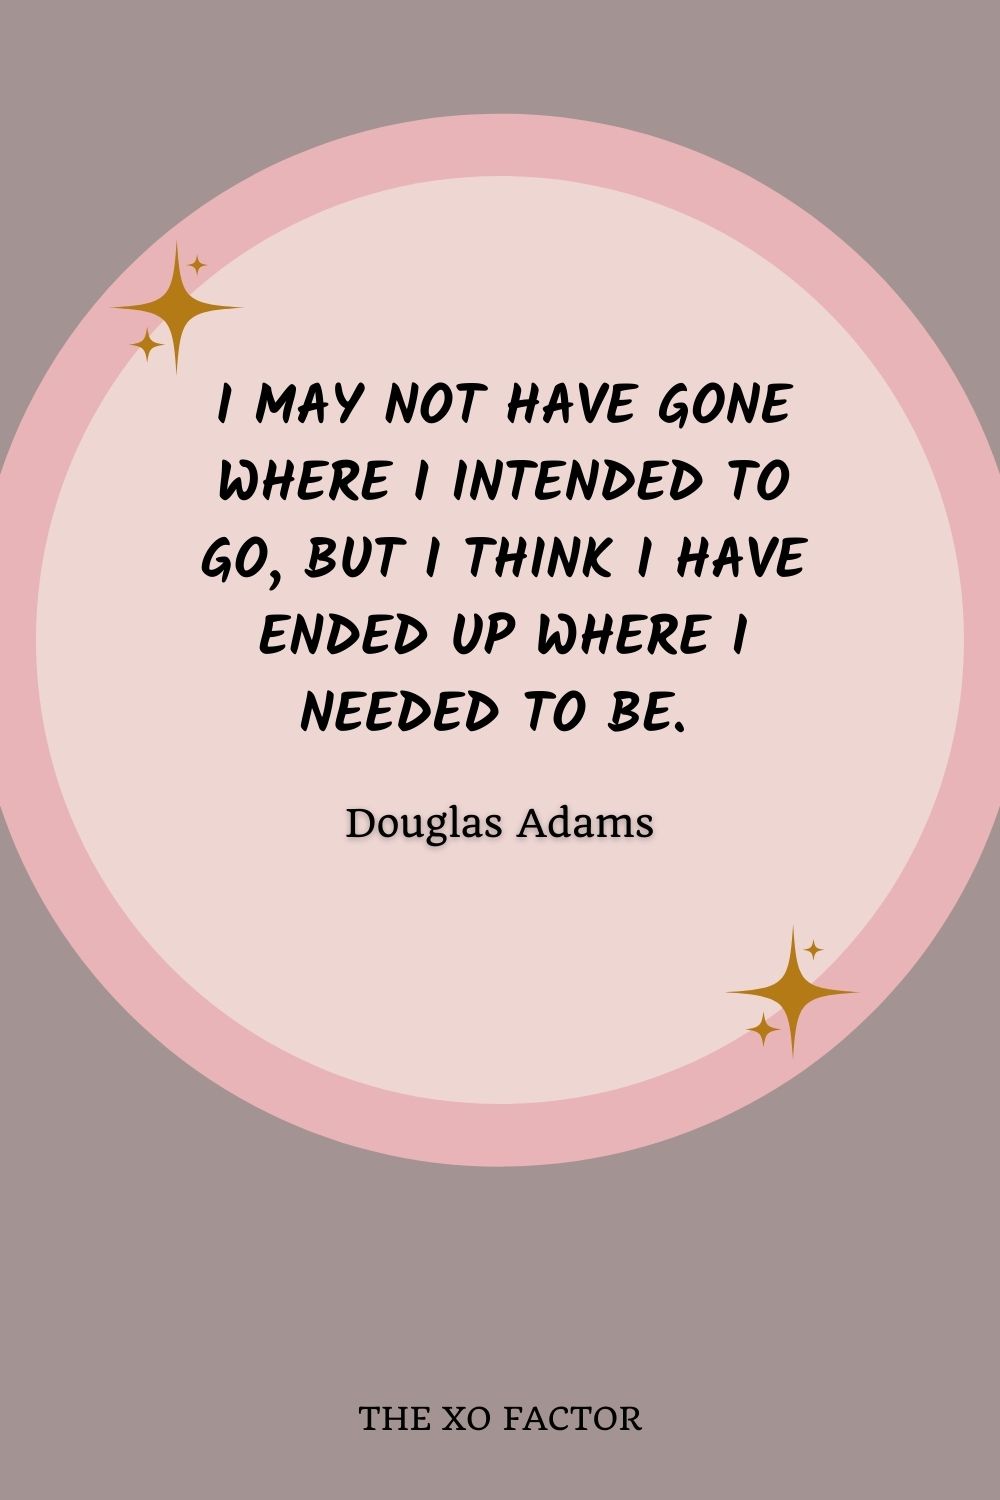 I may not have gone where I intended to go, but I think I have ended up where I needed to be. ― Douglas Adams